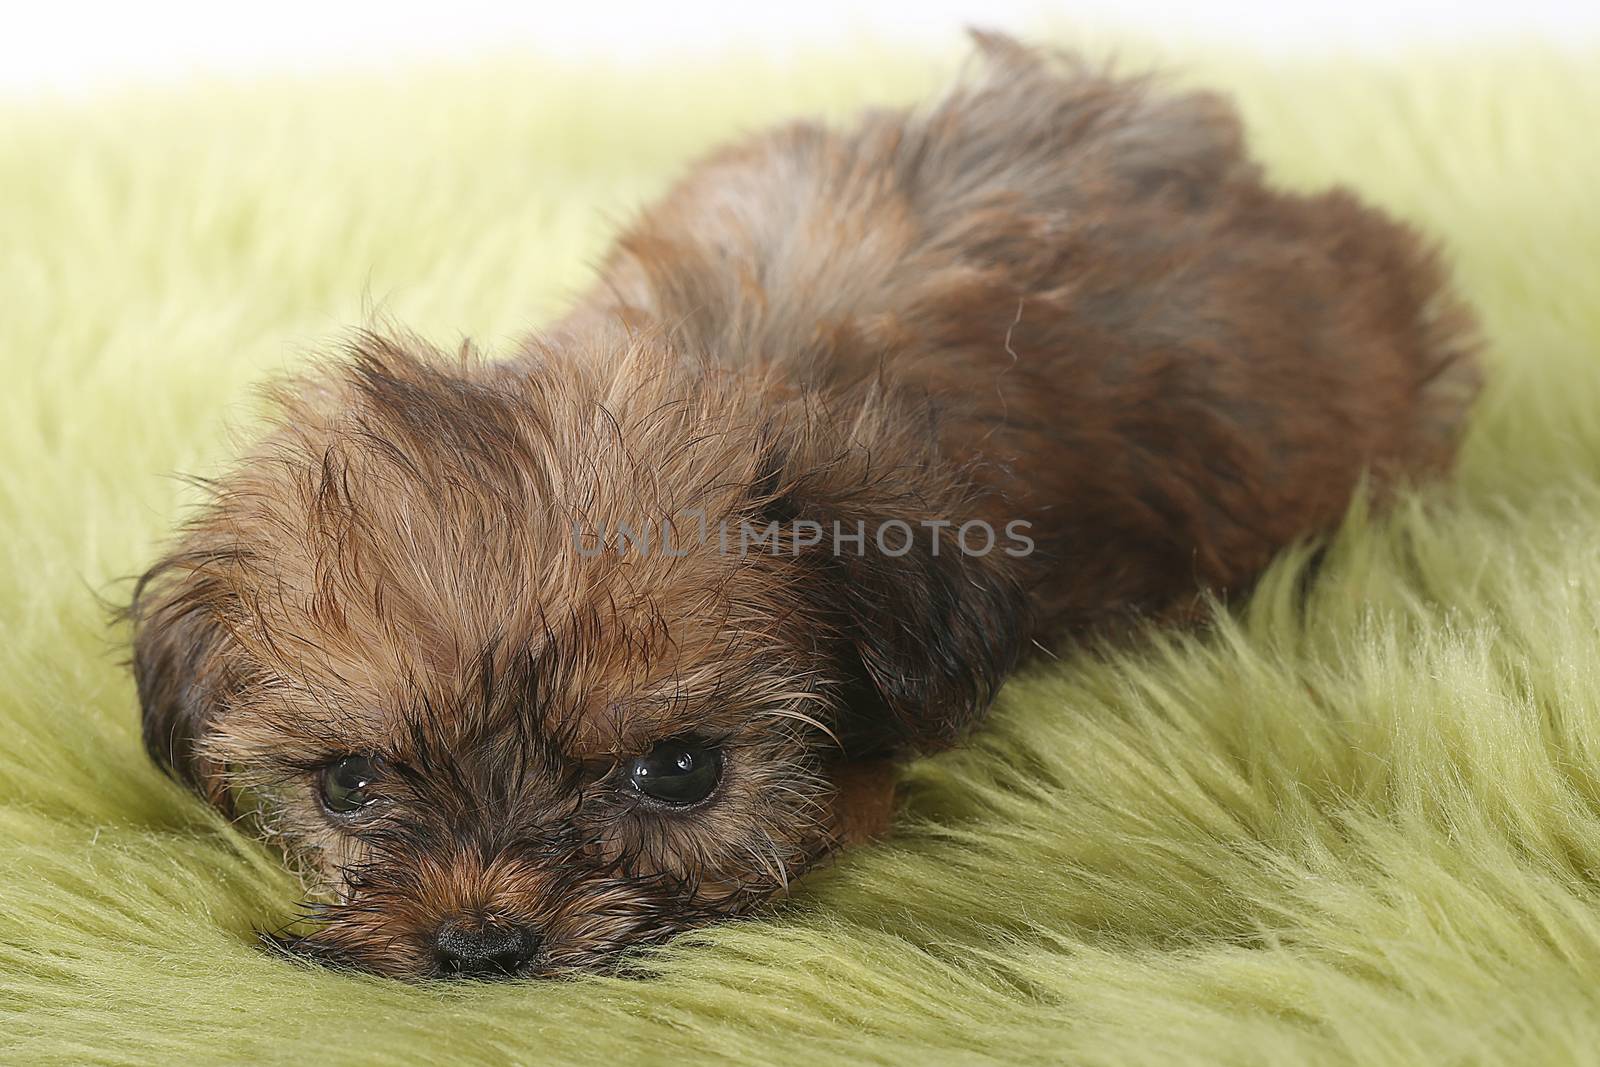 Teacup Yorkshire Terrier on White Background by tobkatrina